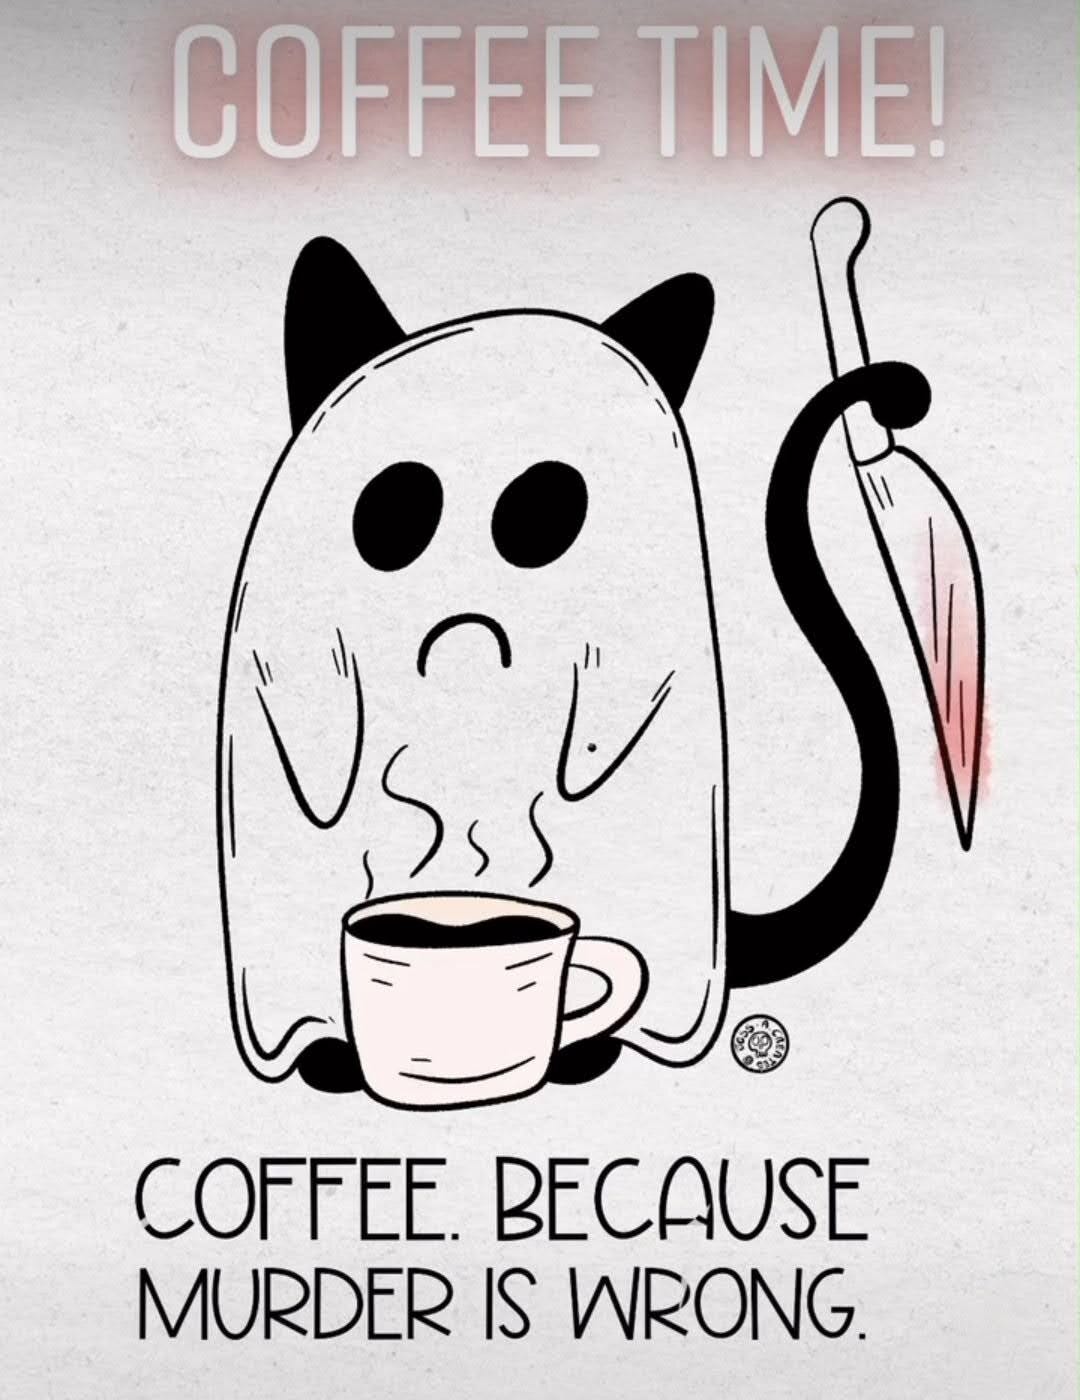 Cartoon of cat with a cup of coffee and a knife, with the words "Coffee. Because murder is wrong."